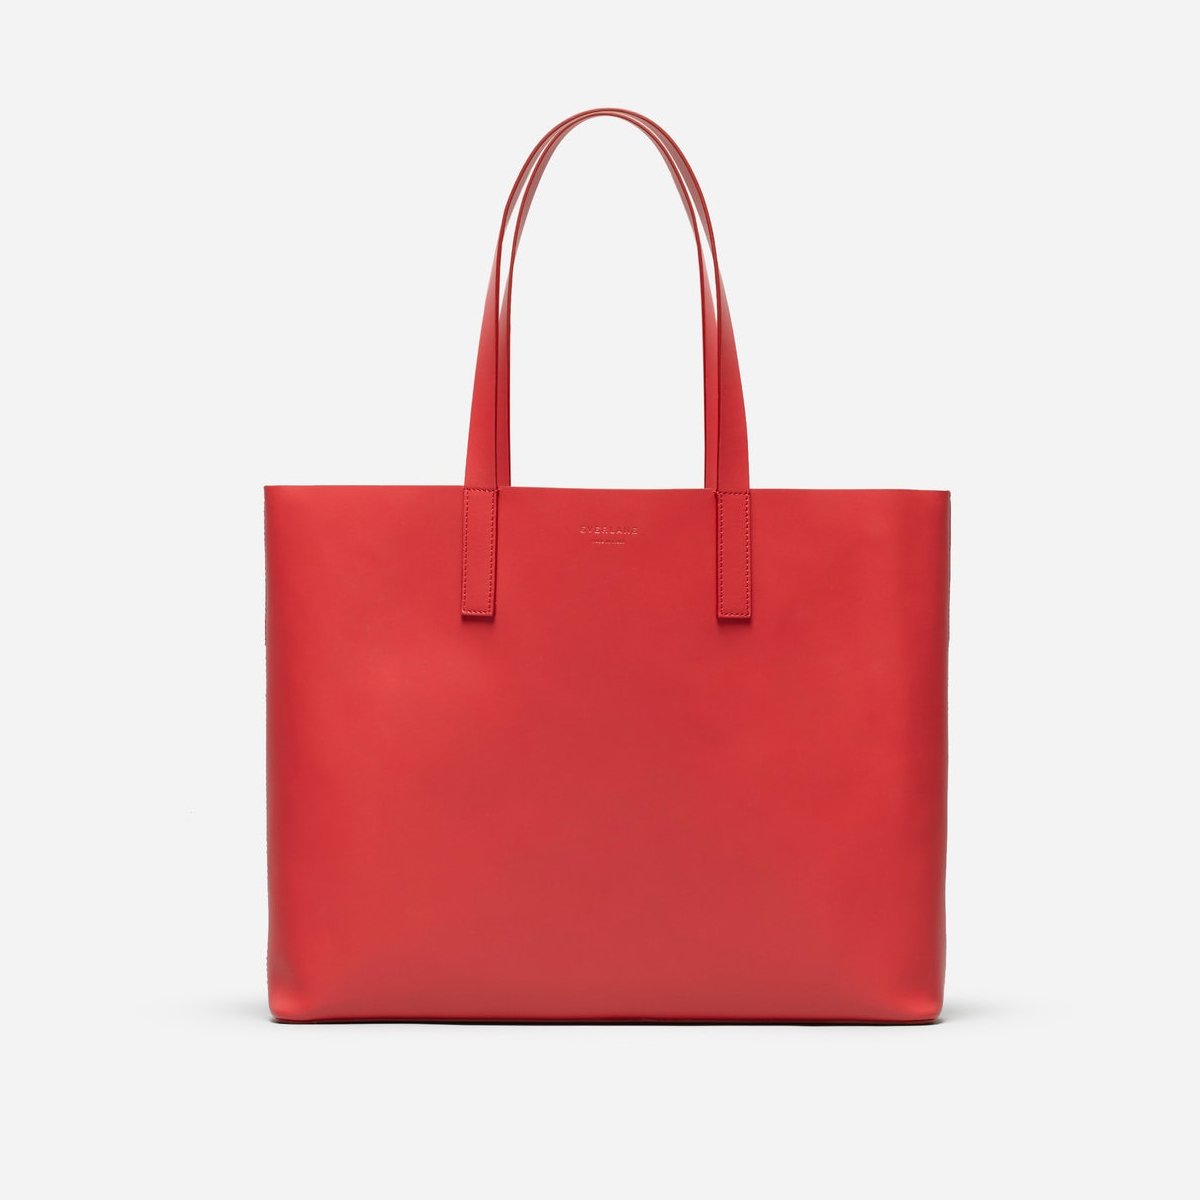 The Day Market Tote, Everlane, 5